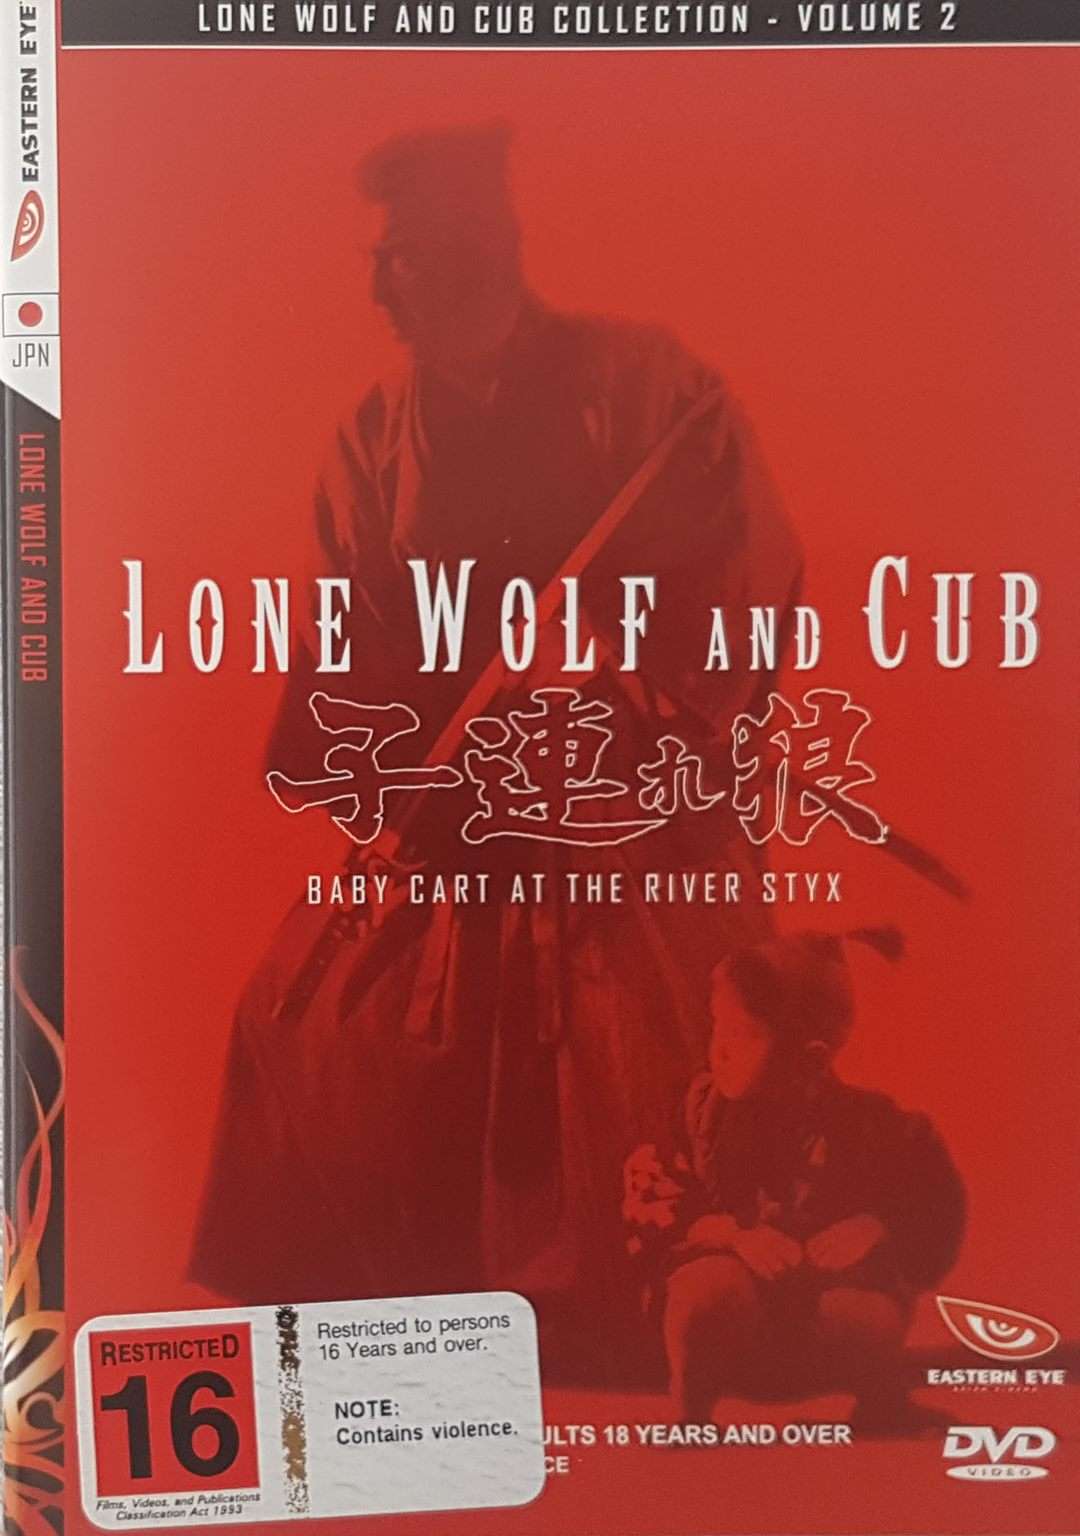 Lone Wolf and Cub: Volume 2 Baby Cart at the River Styx